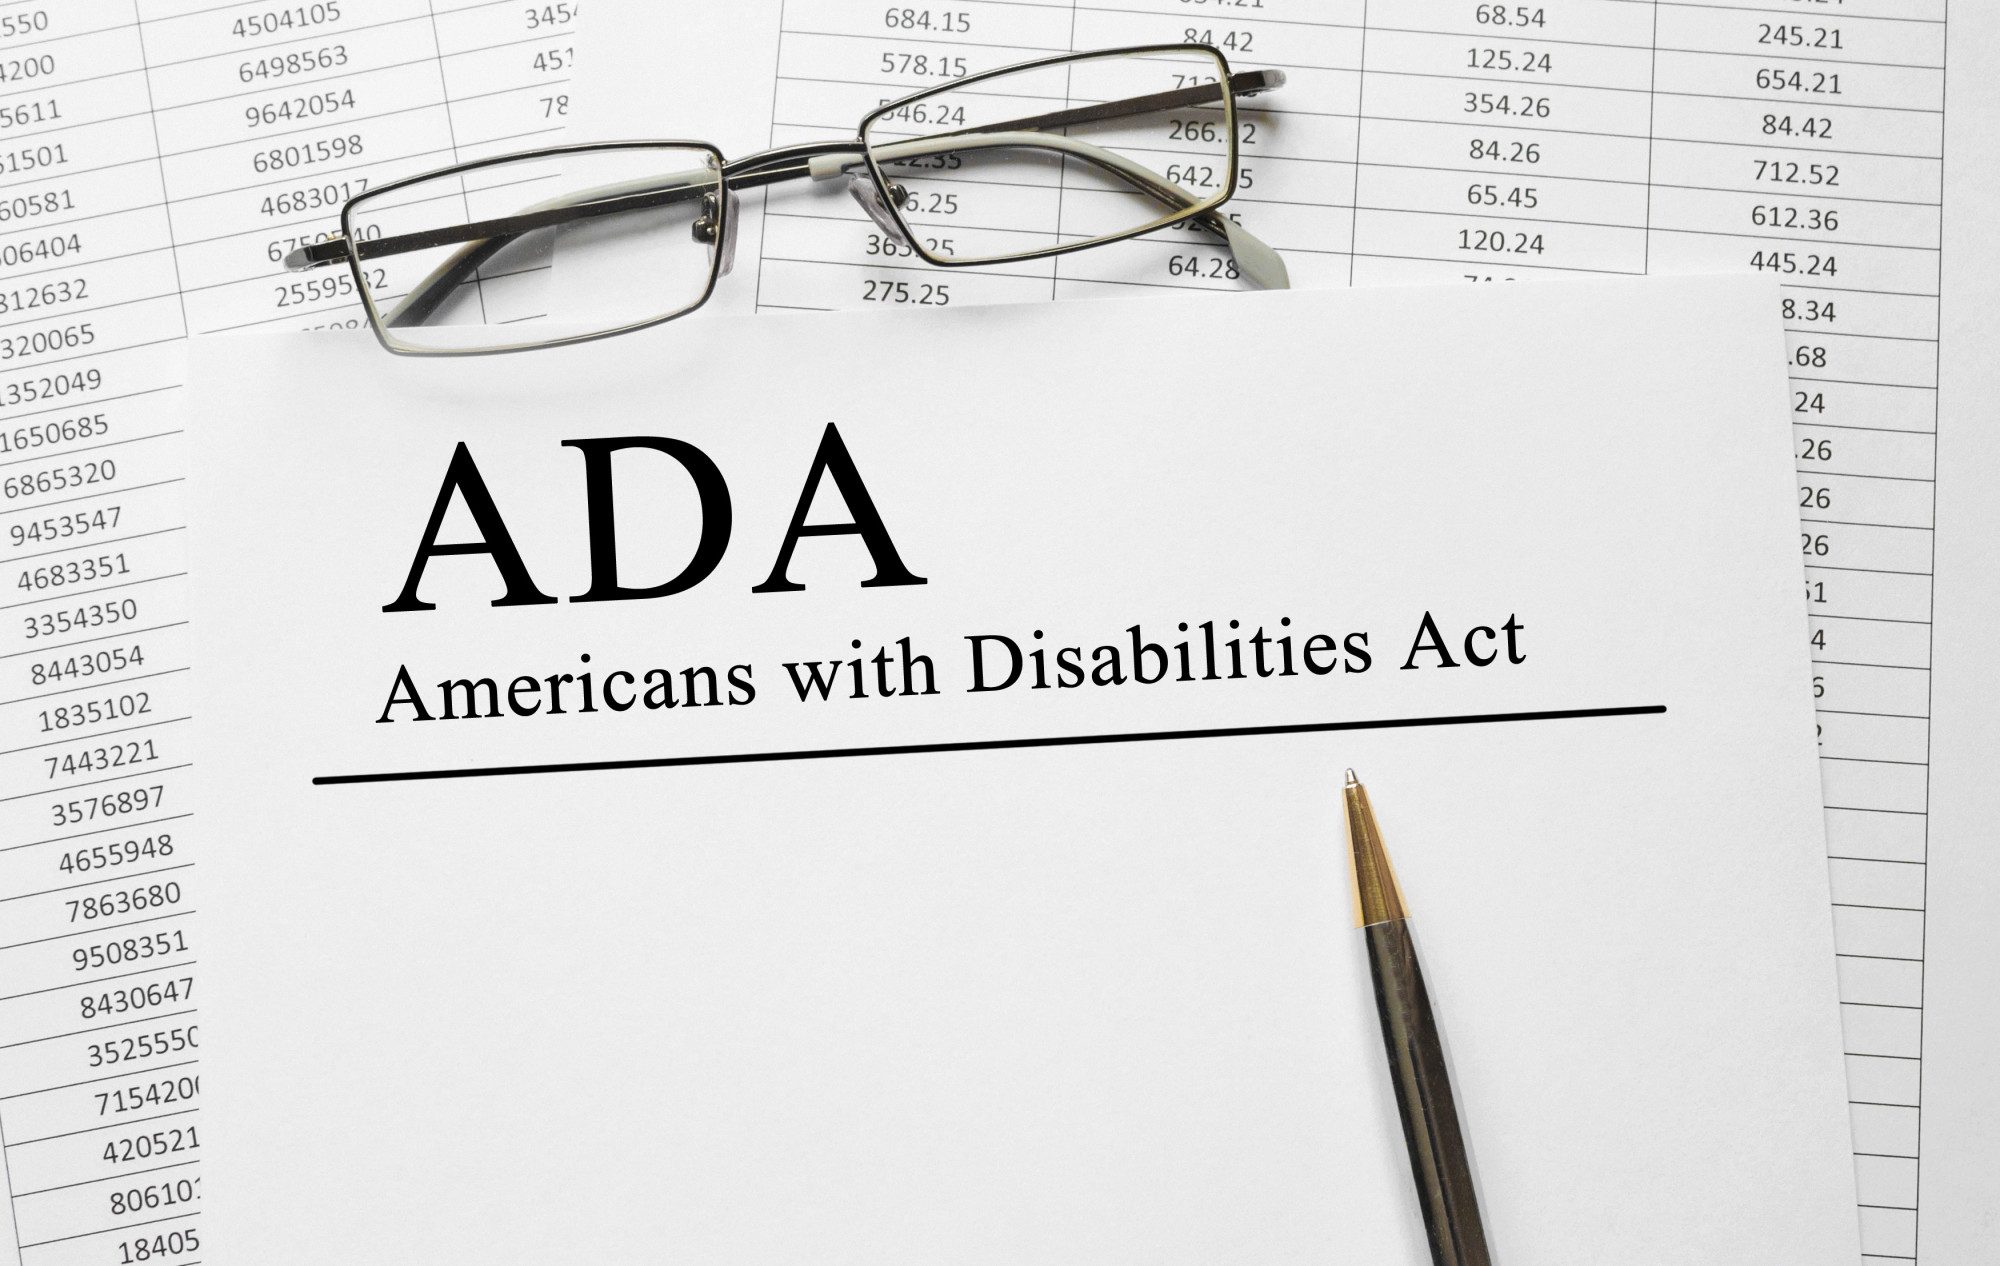 Paper with Americans with Disabilities Act (ADA) on a table